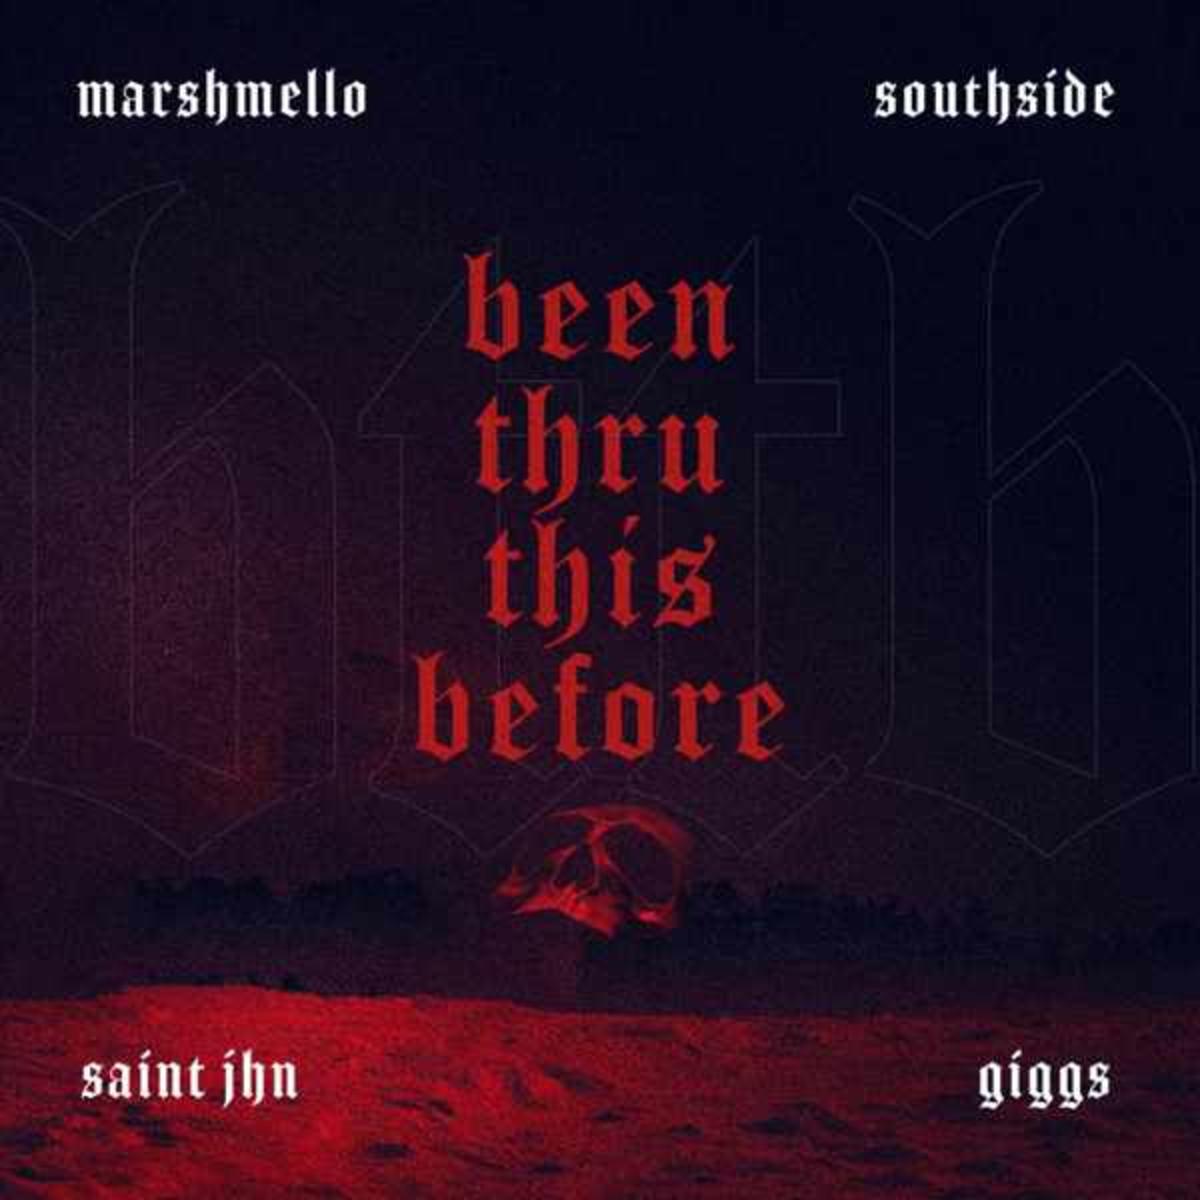 Marshmello, Southside, Giggs & Saint JHN Link Up For “Been Thru This Before”